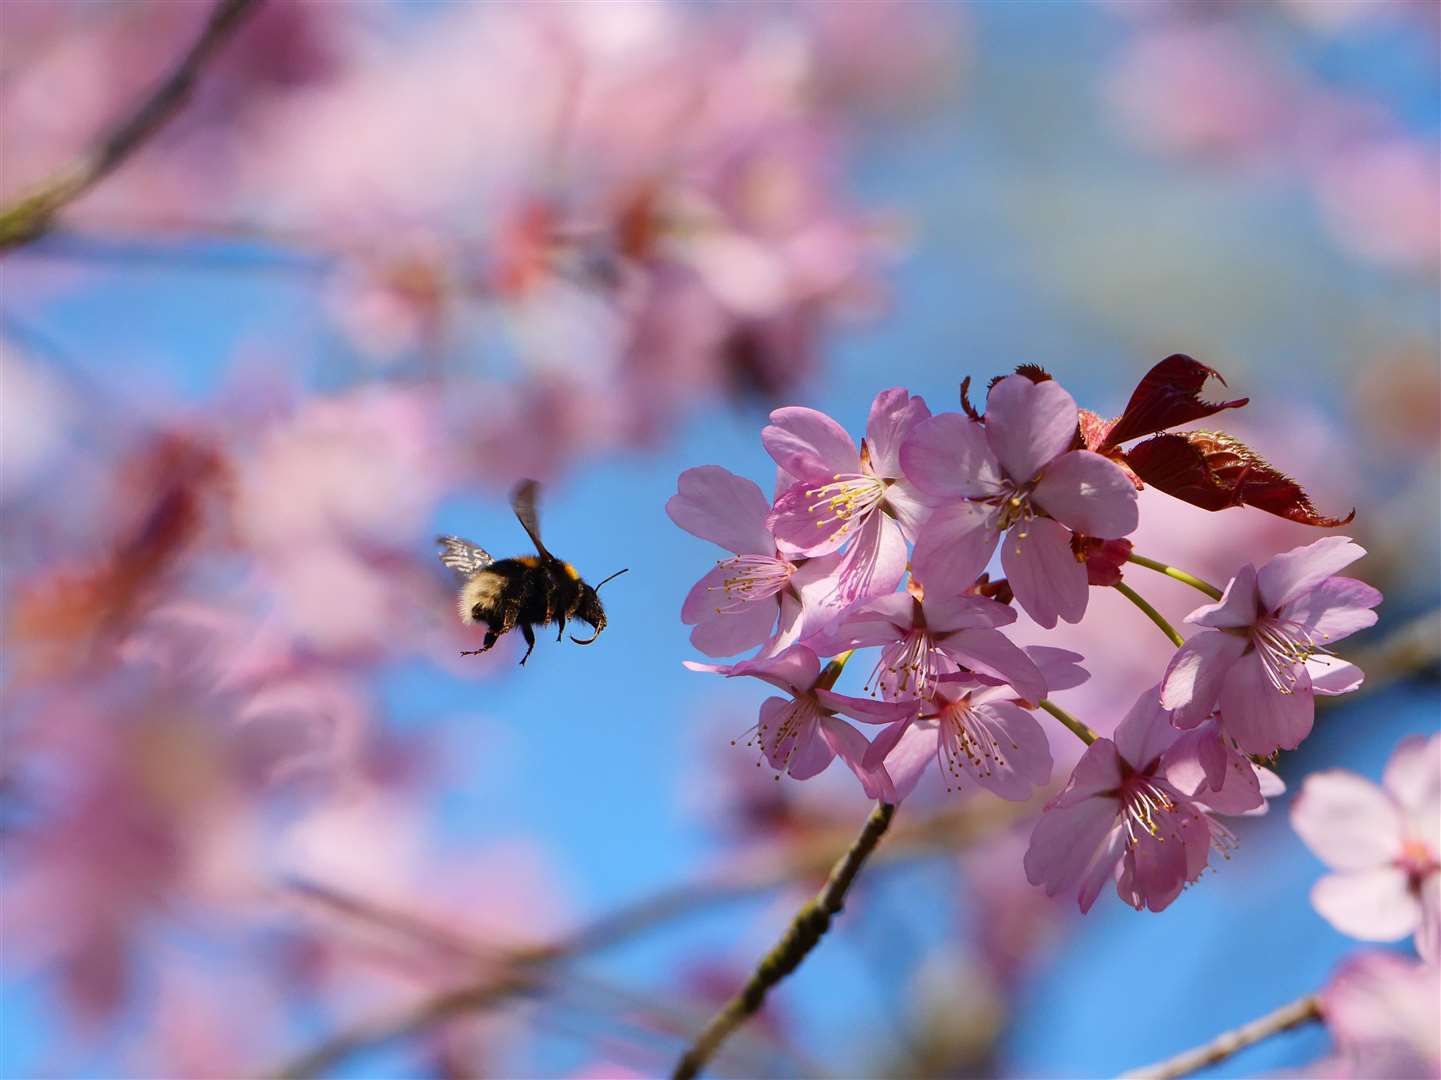 Bumblebee nectaring on pink cherry blossom Picture: National Trust/Rob Coleman